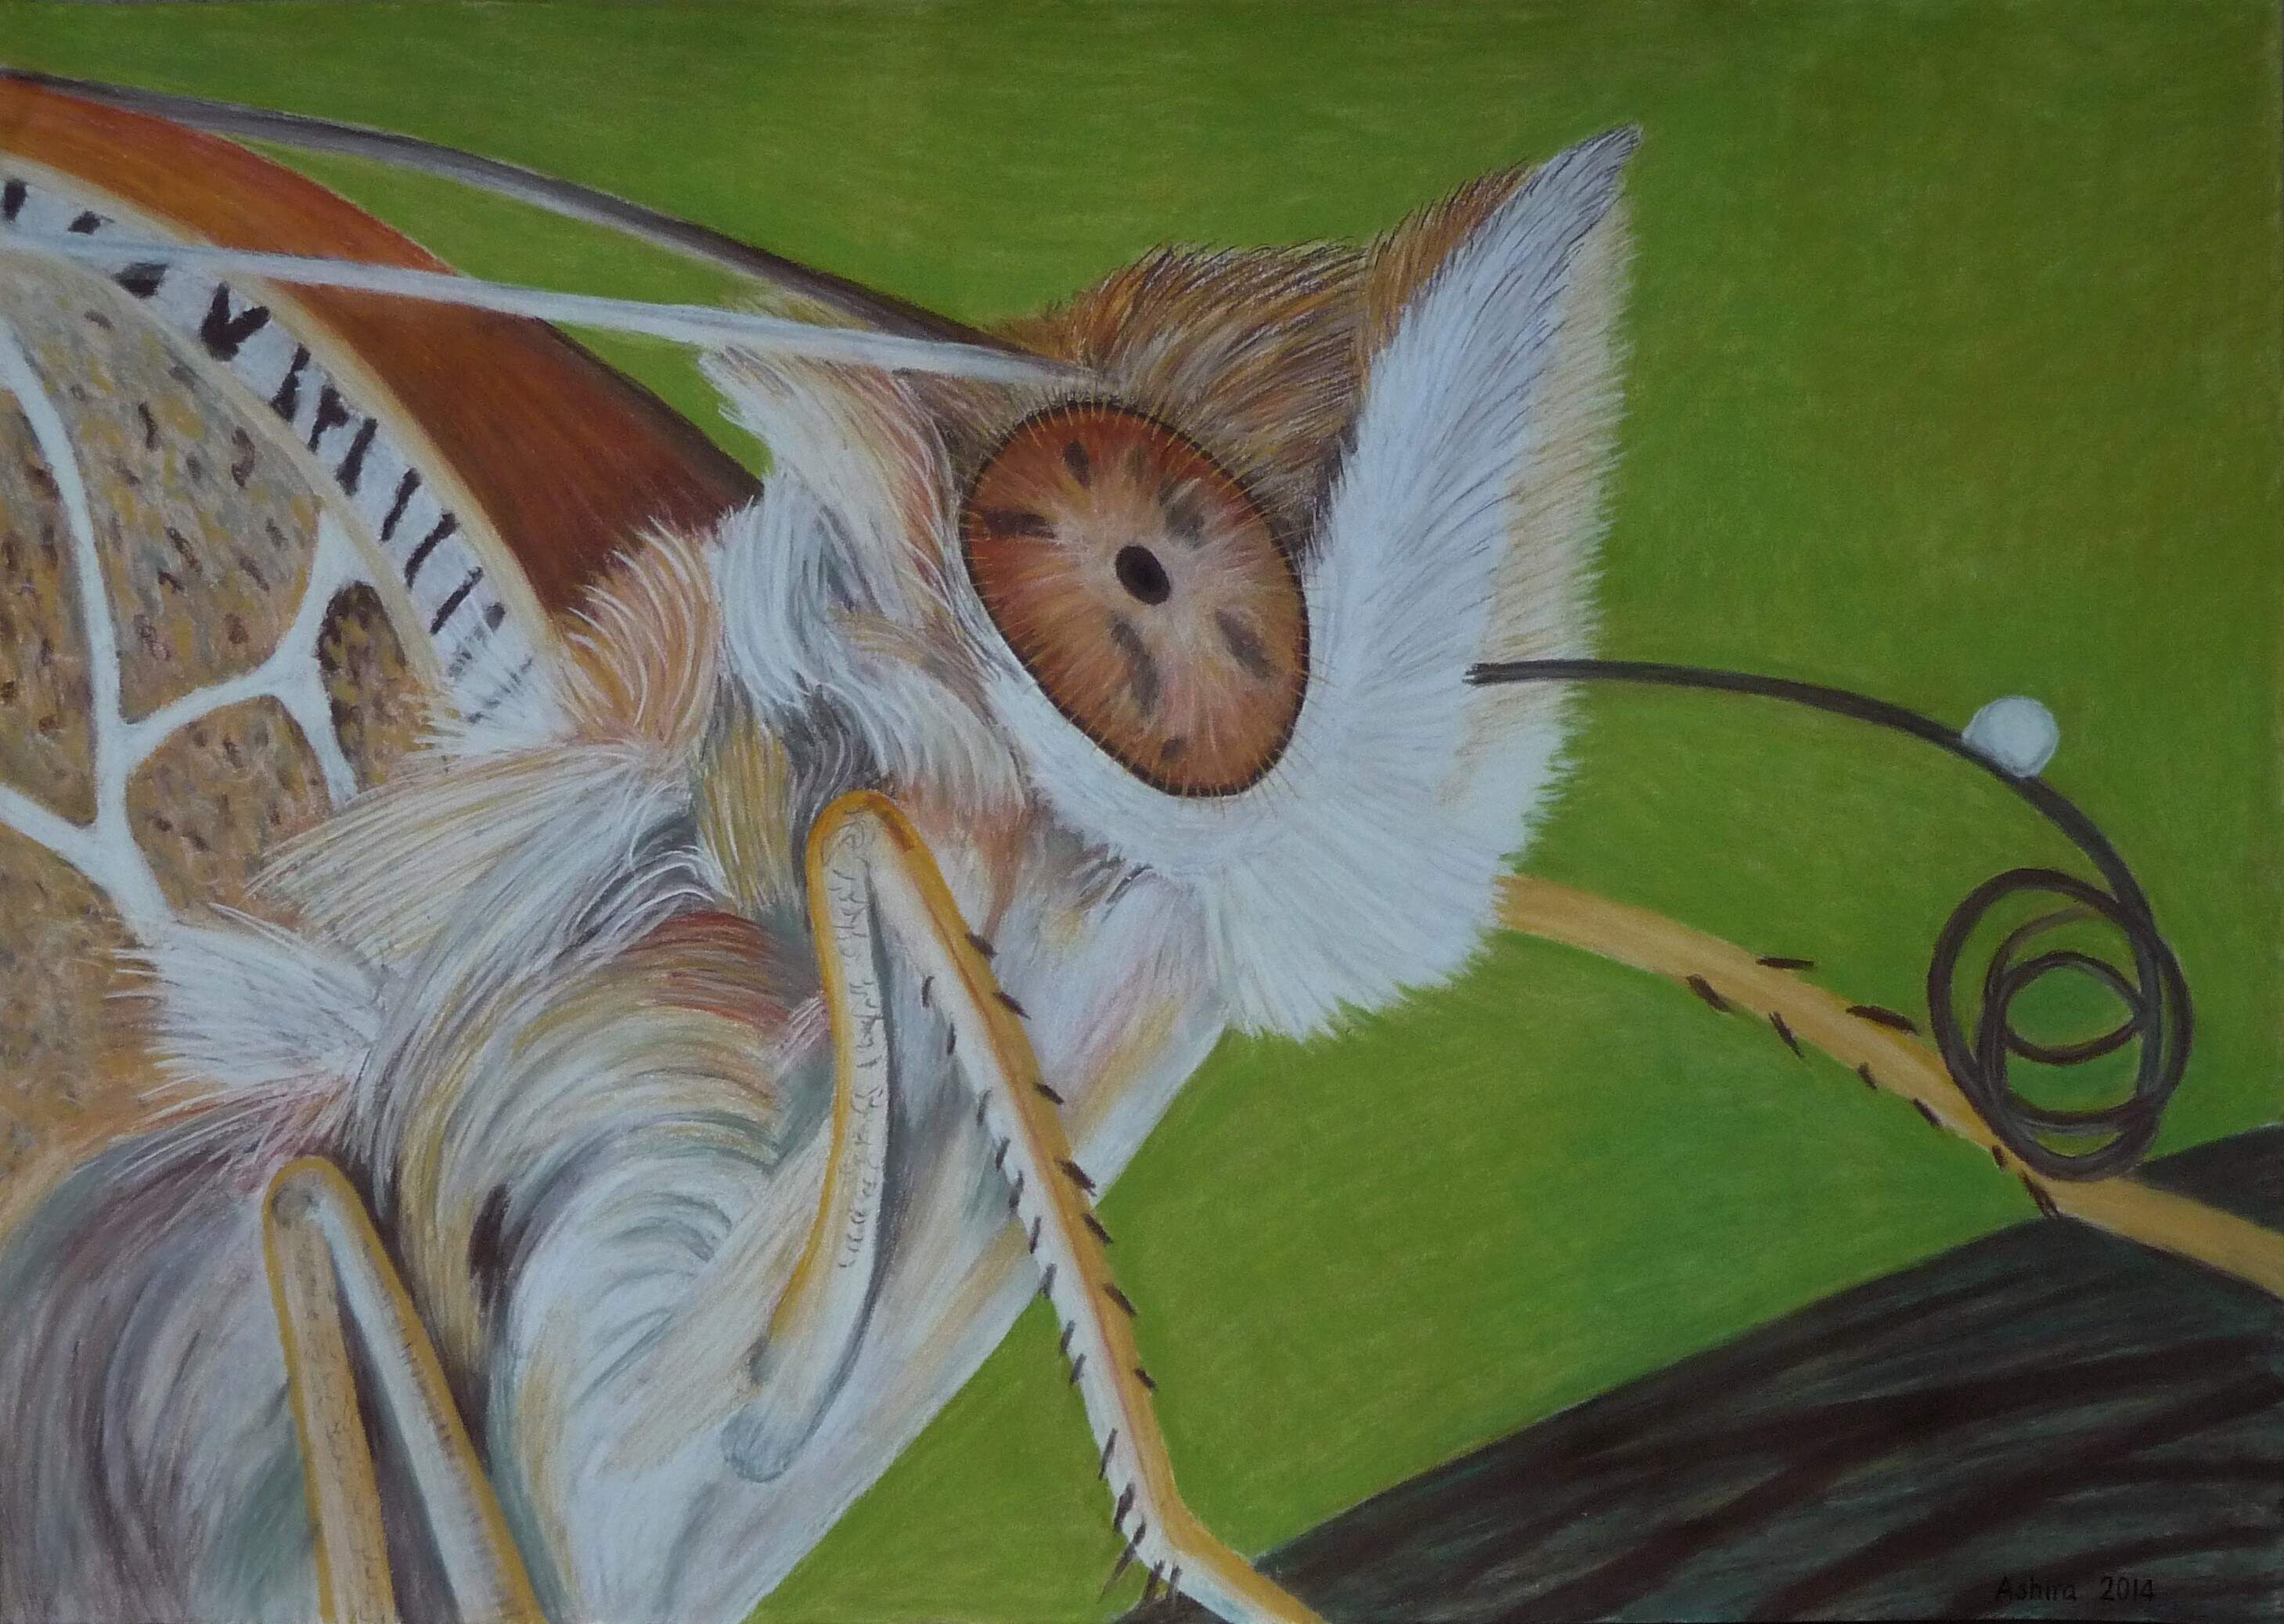 lethe europa / bamboo treebrown  -  may 2014, soft pastel, 50x70 cm